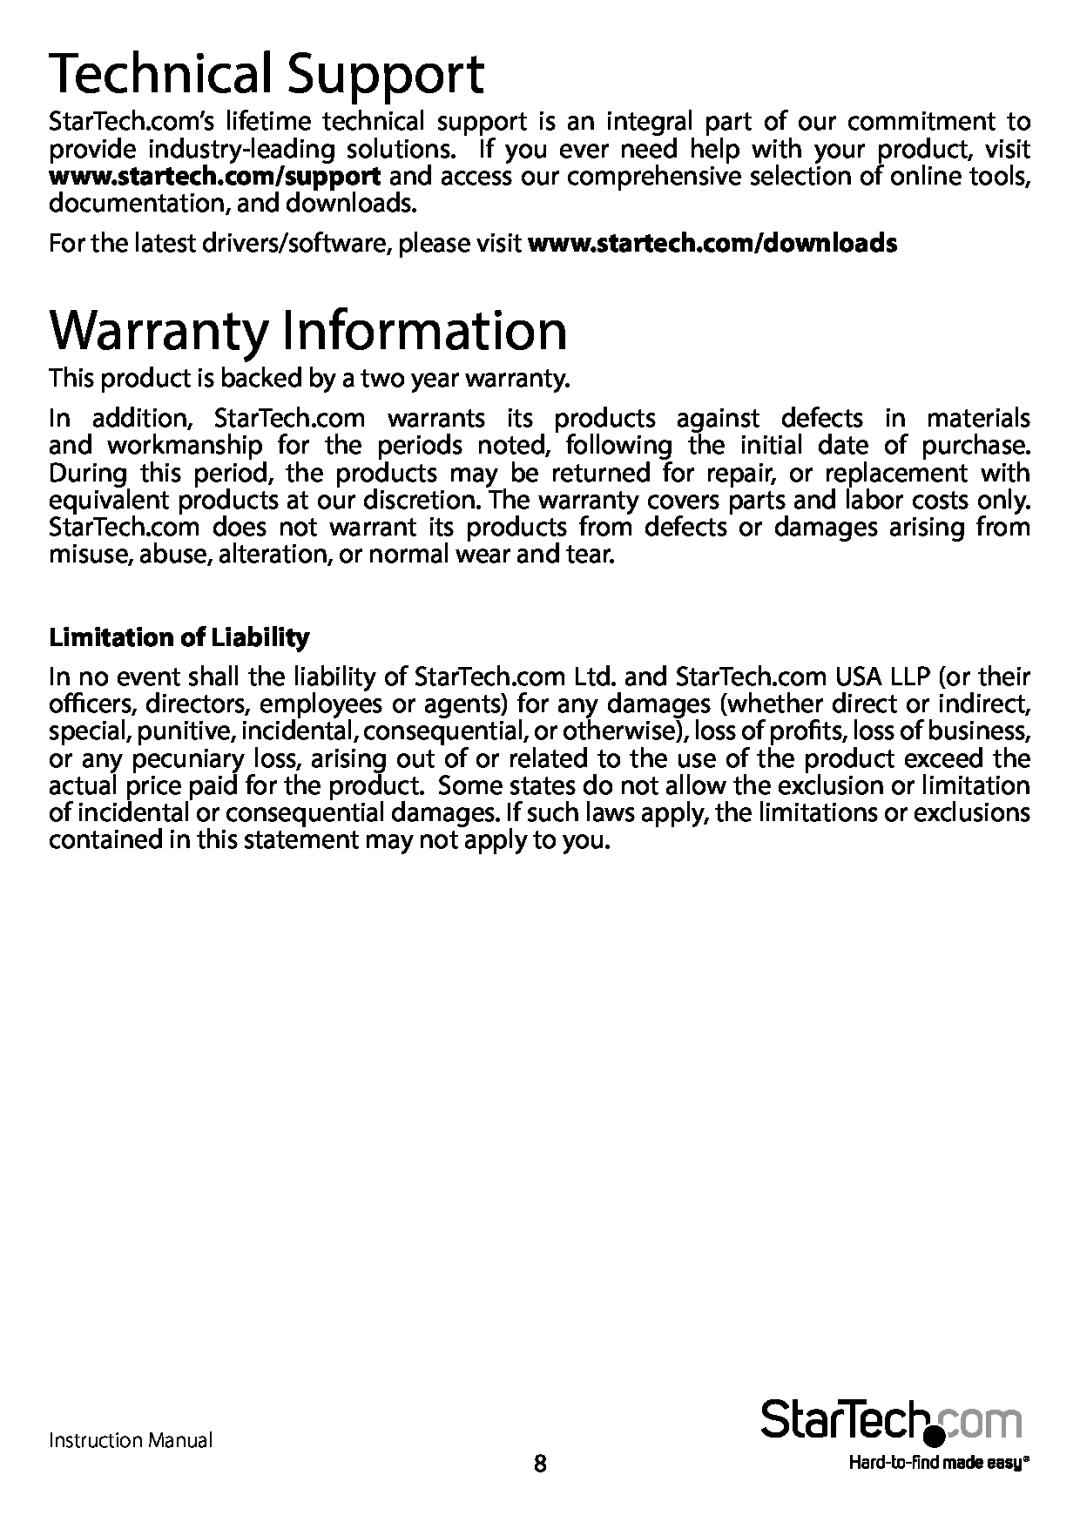 StarTech.com PCISOUND5CH2 manual Technical Support, Warranty Information, Limitation of Liability 